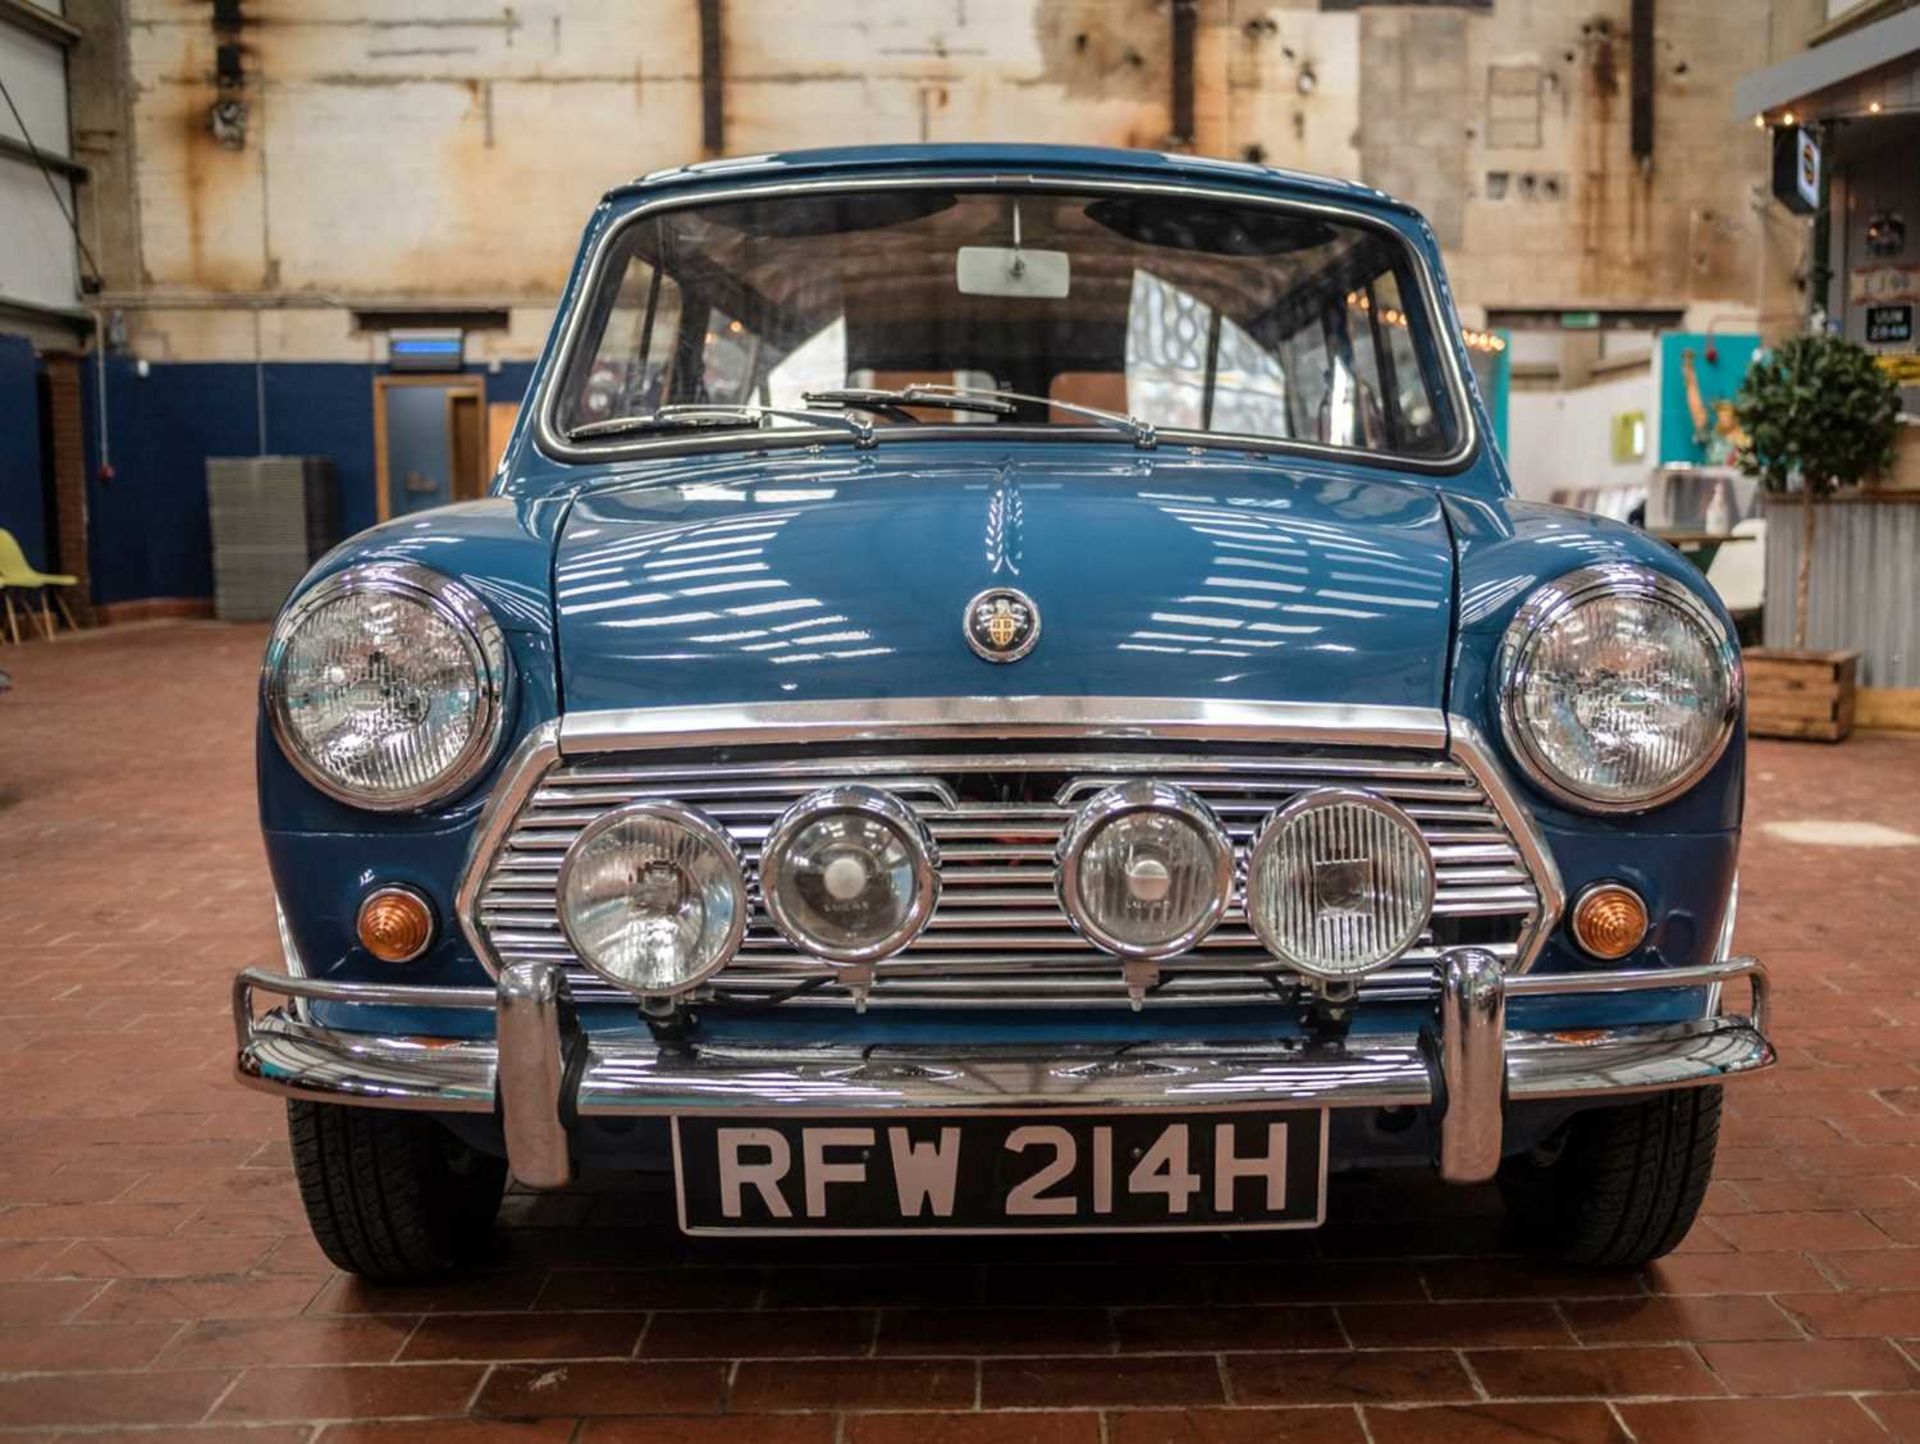 1970 Austin Mini Countryman Fully restored to concourse standard - Image 5 of 43